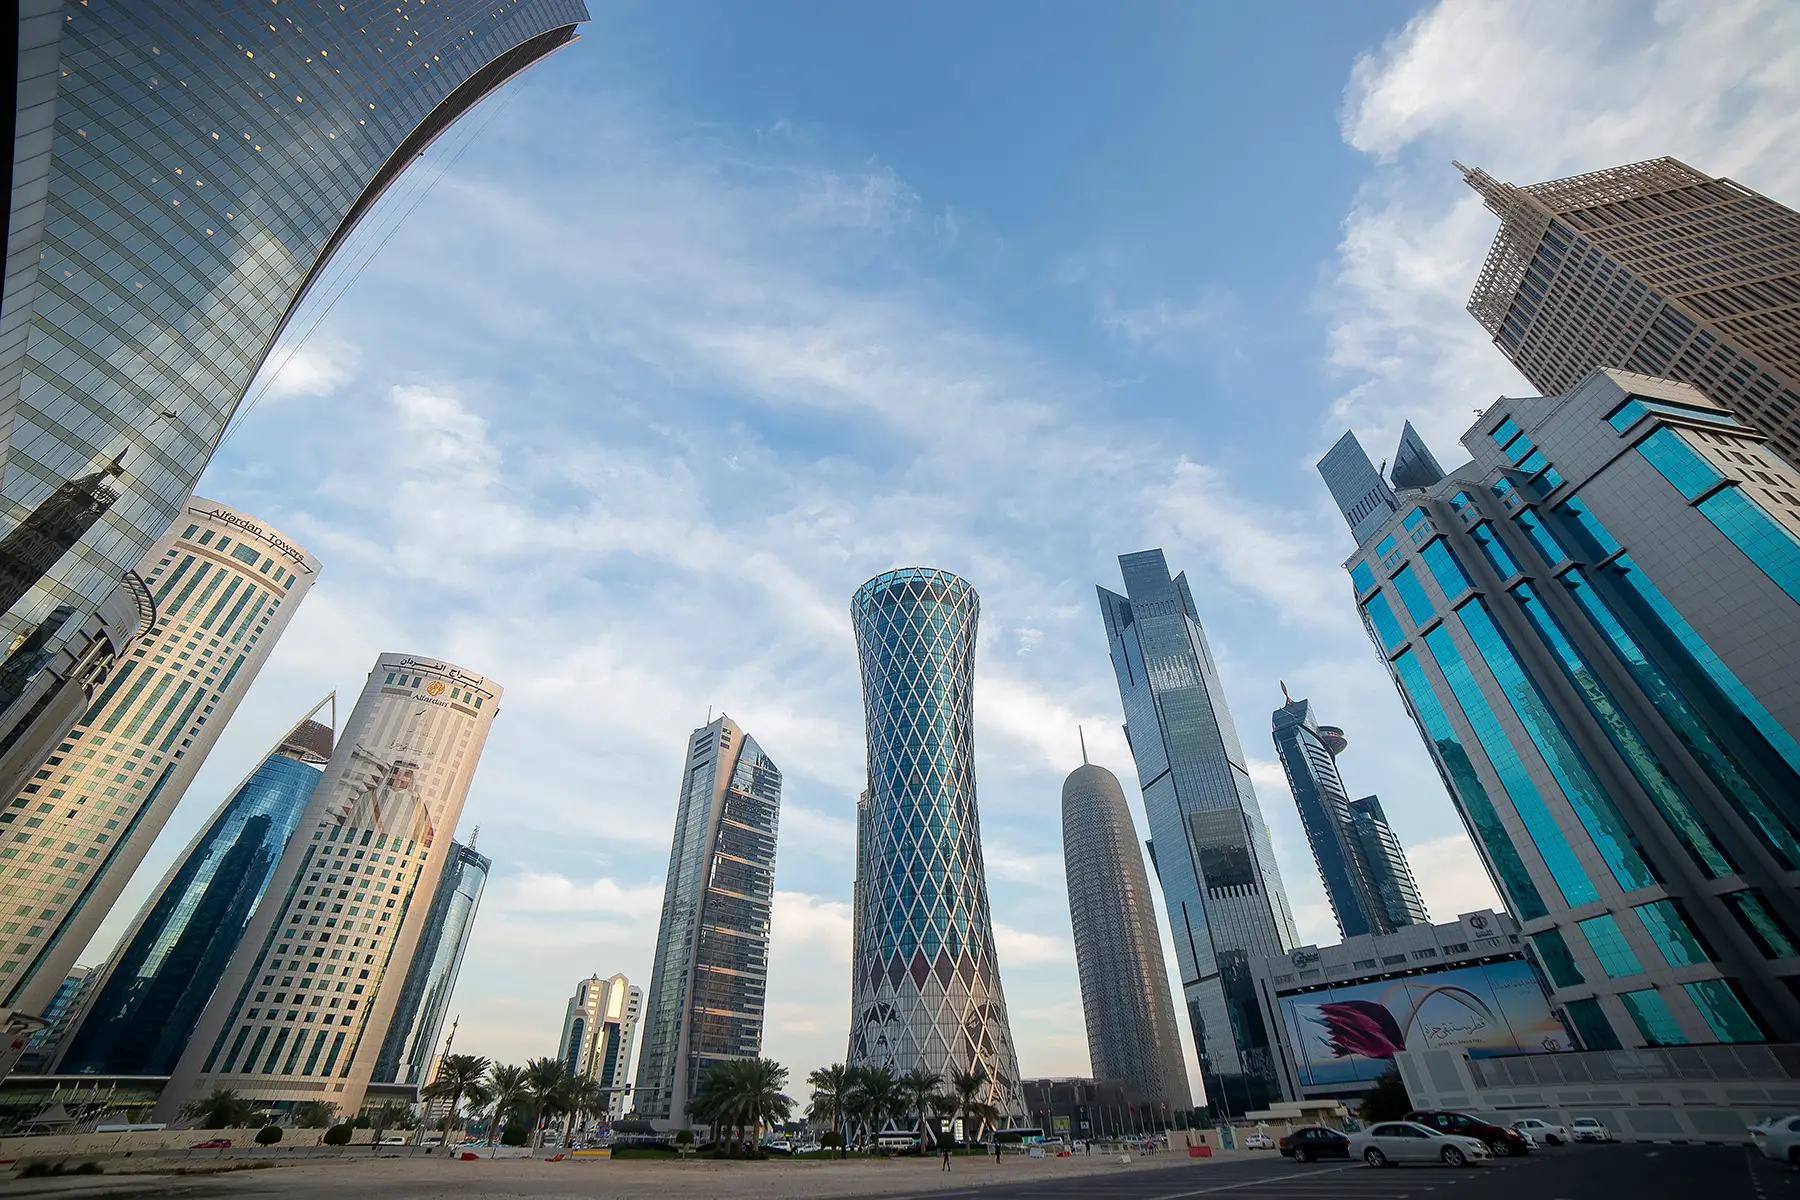 High-rise office towers in Doha's business district